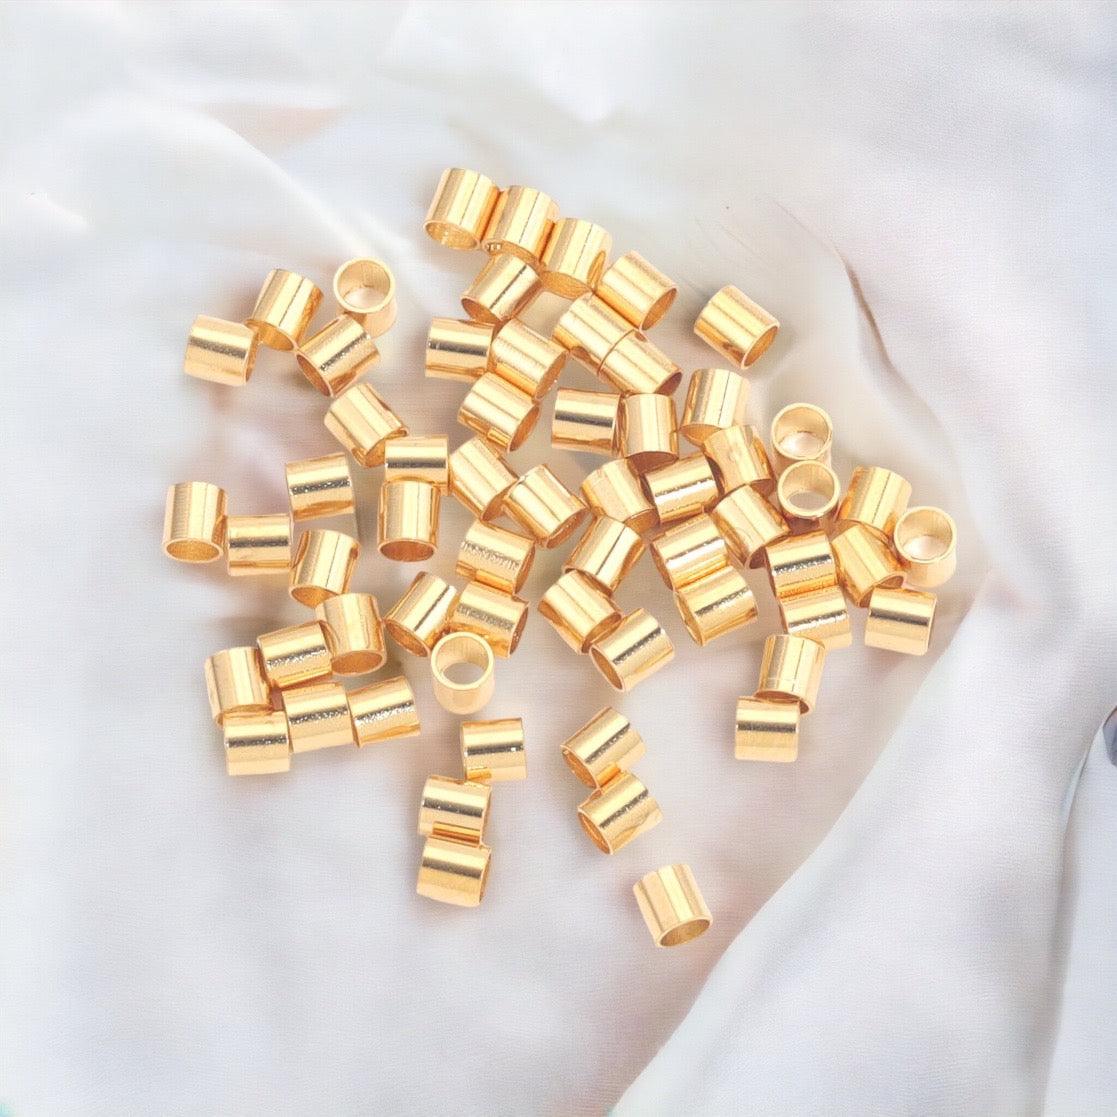 14K Gold Filled 2x2mm Crimp Tube (10 pieces) - Too Cute Beads